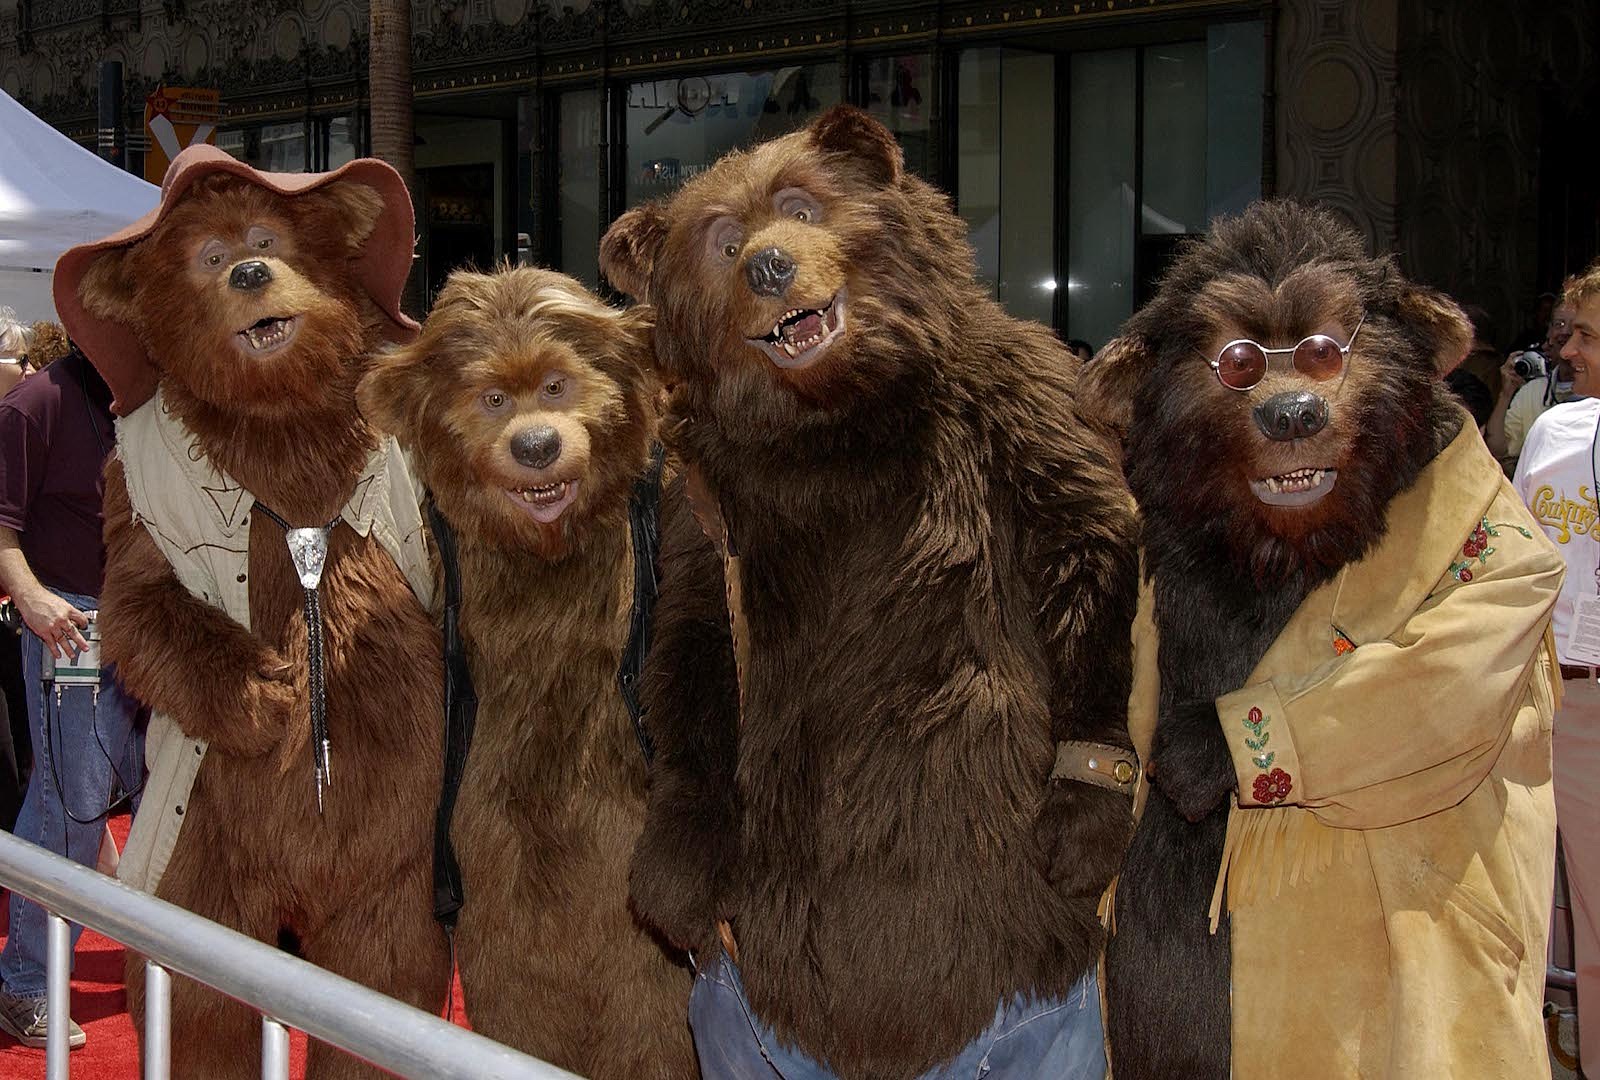 How The Country Bears Became The Strangest Disney Movie Ever